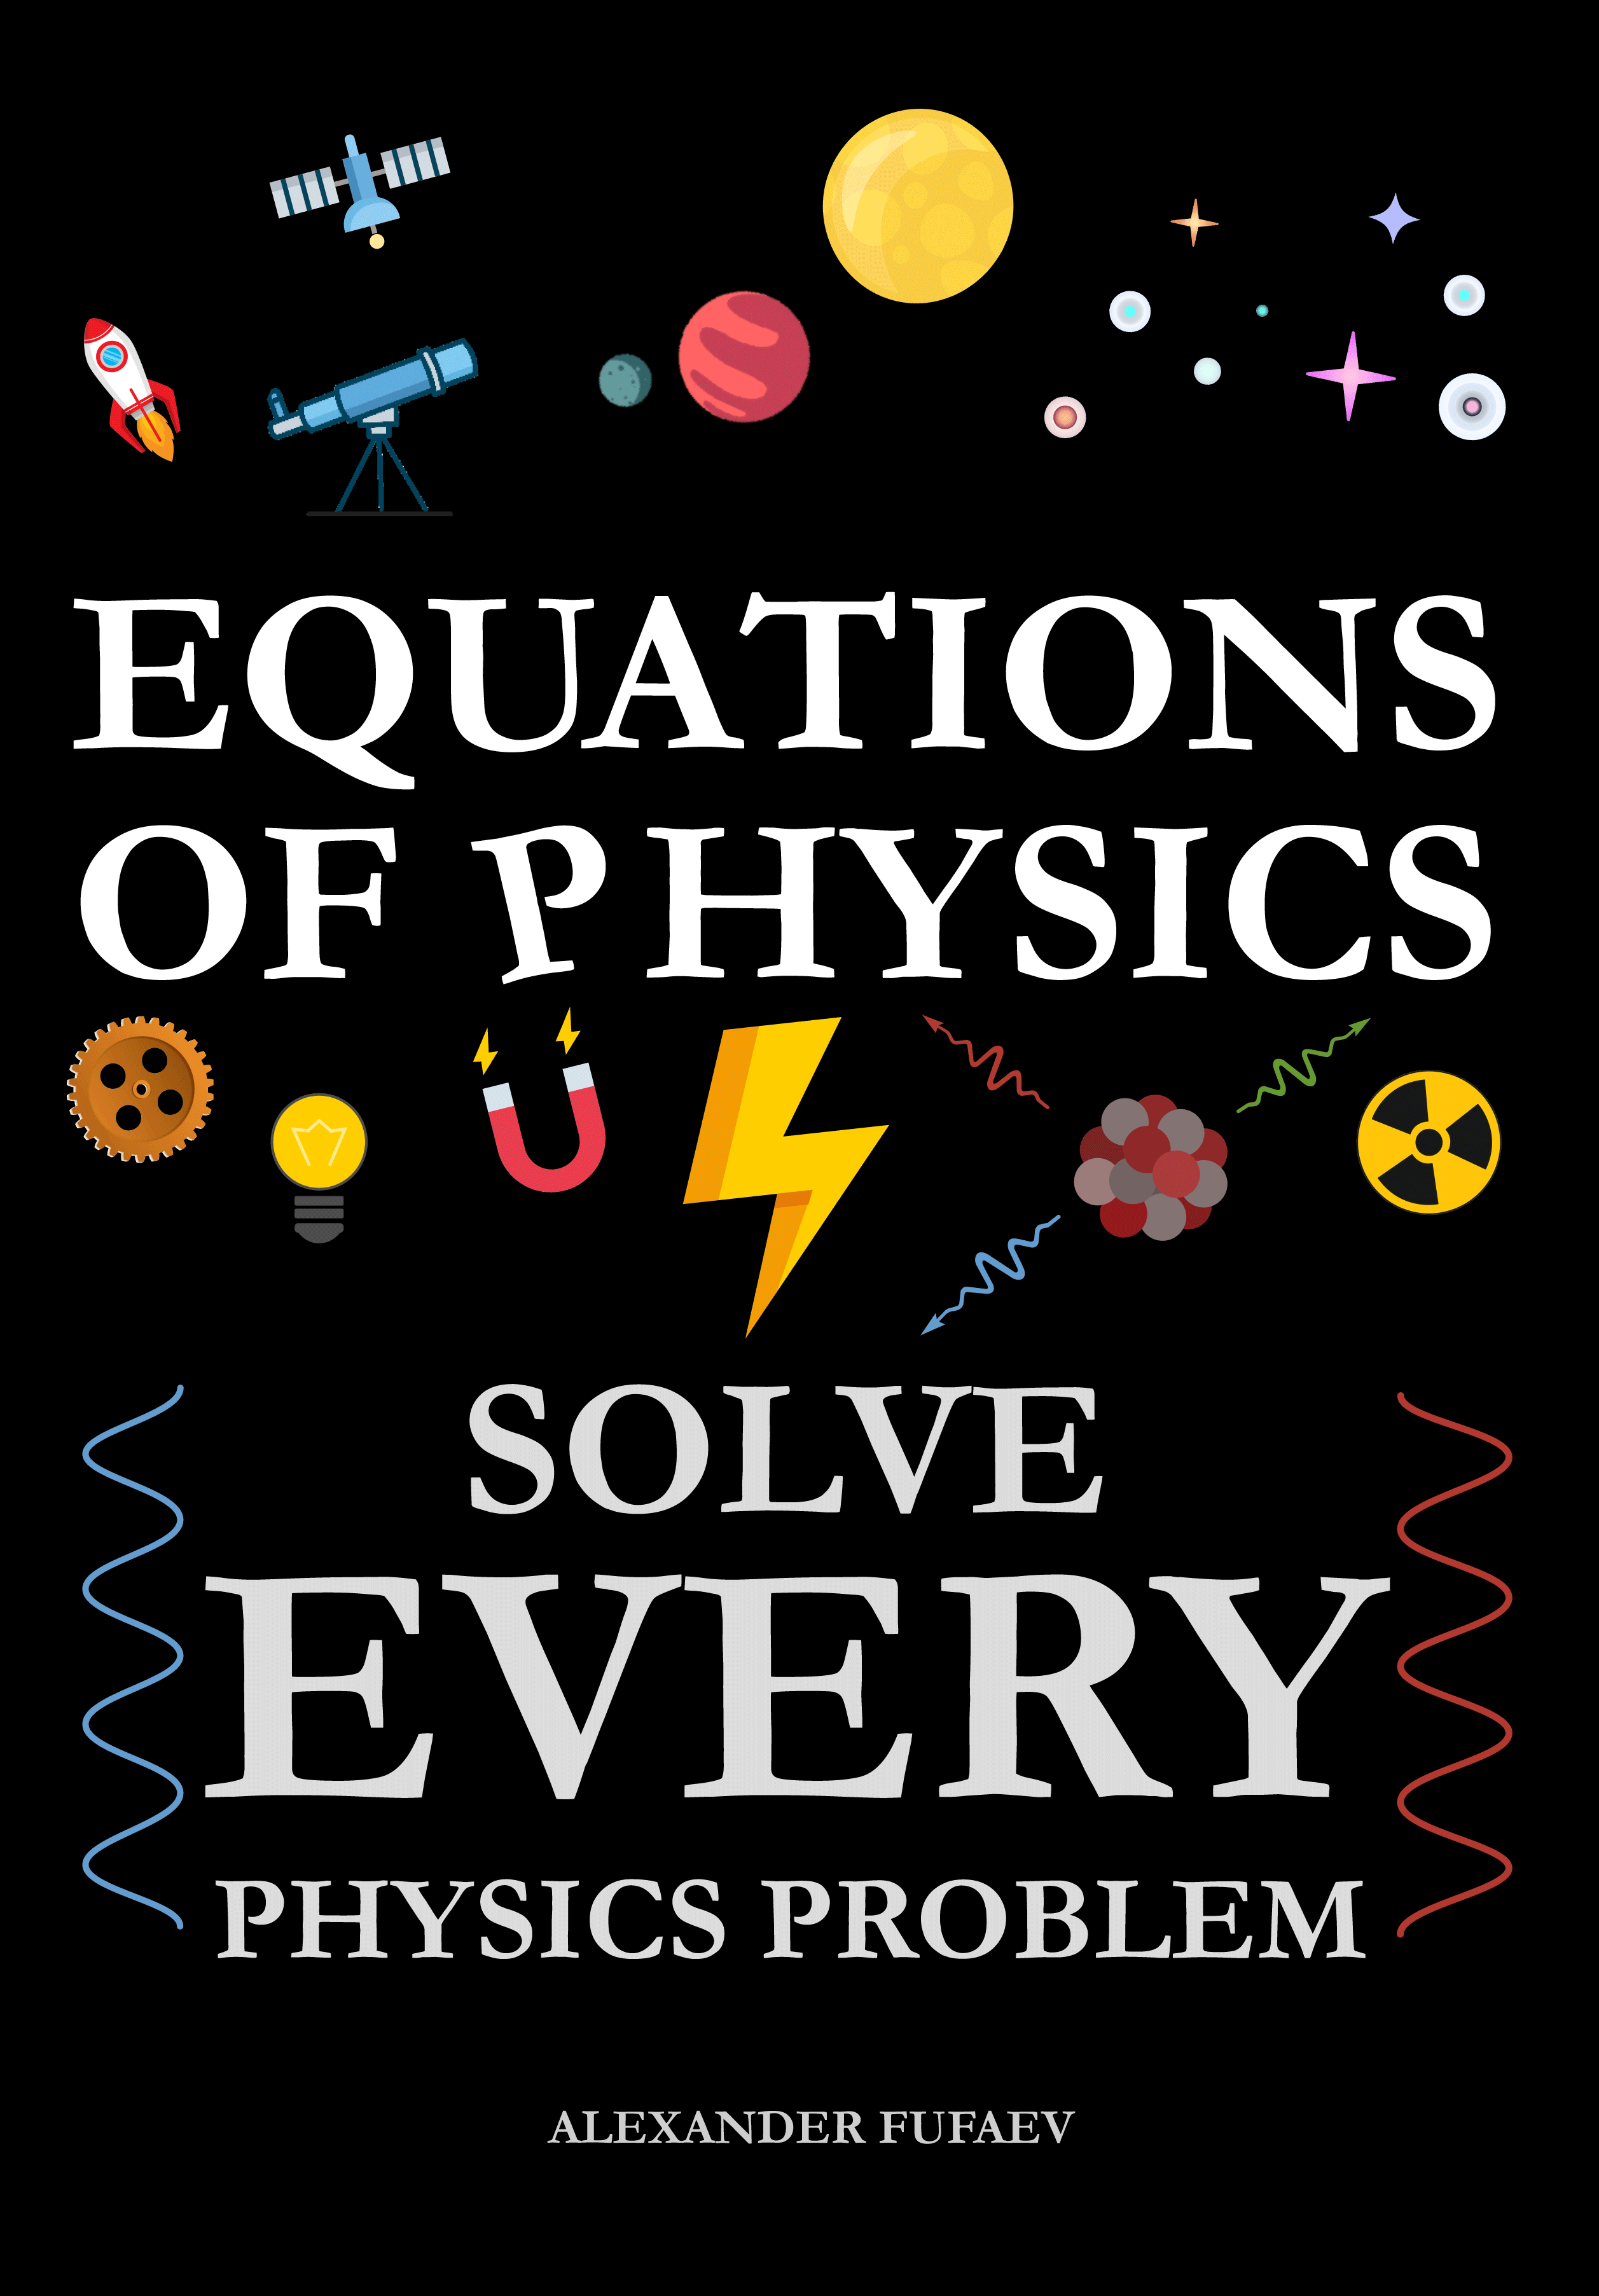 Equations of Physics: Solve Every Physics Problem